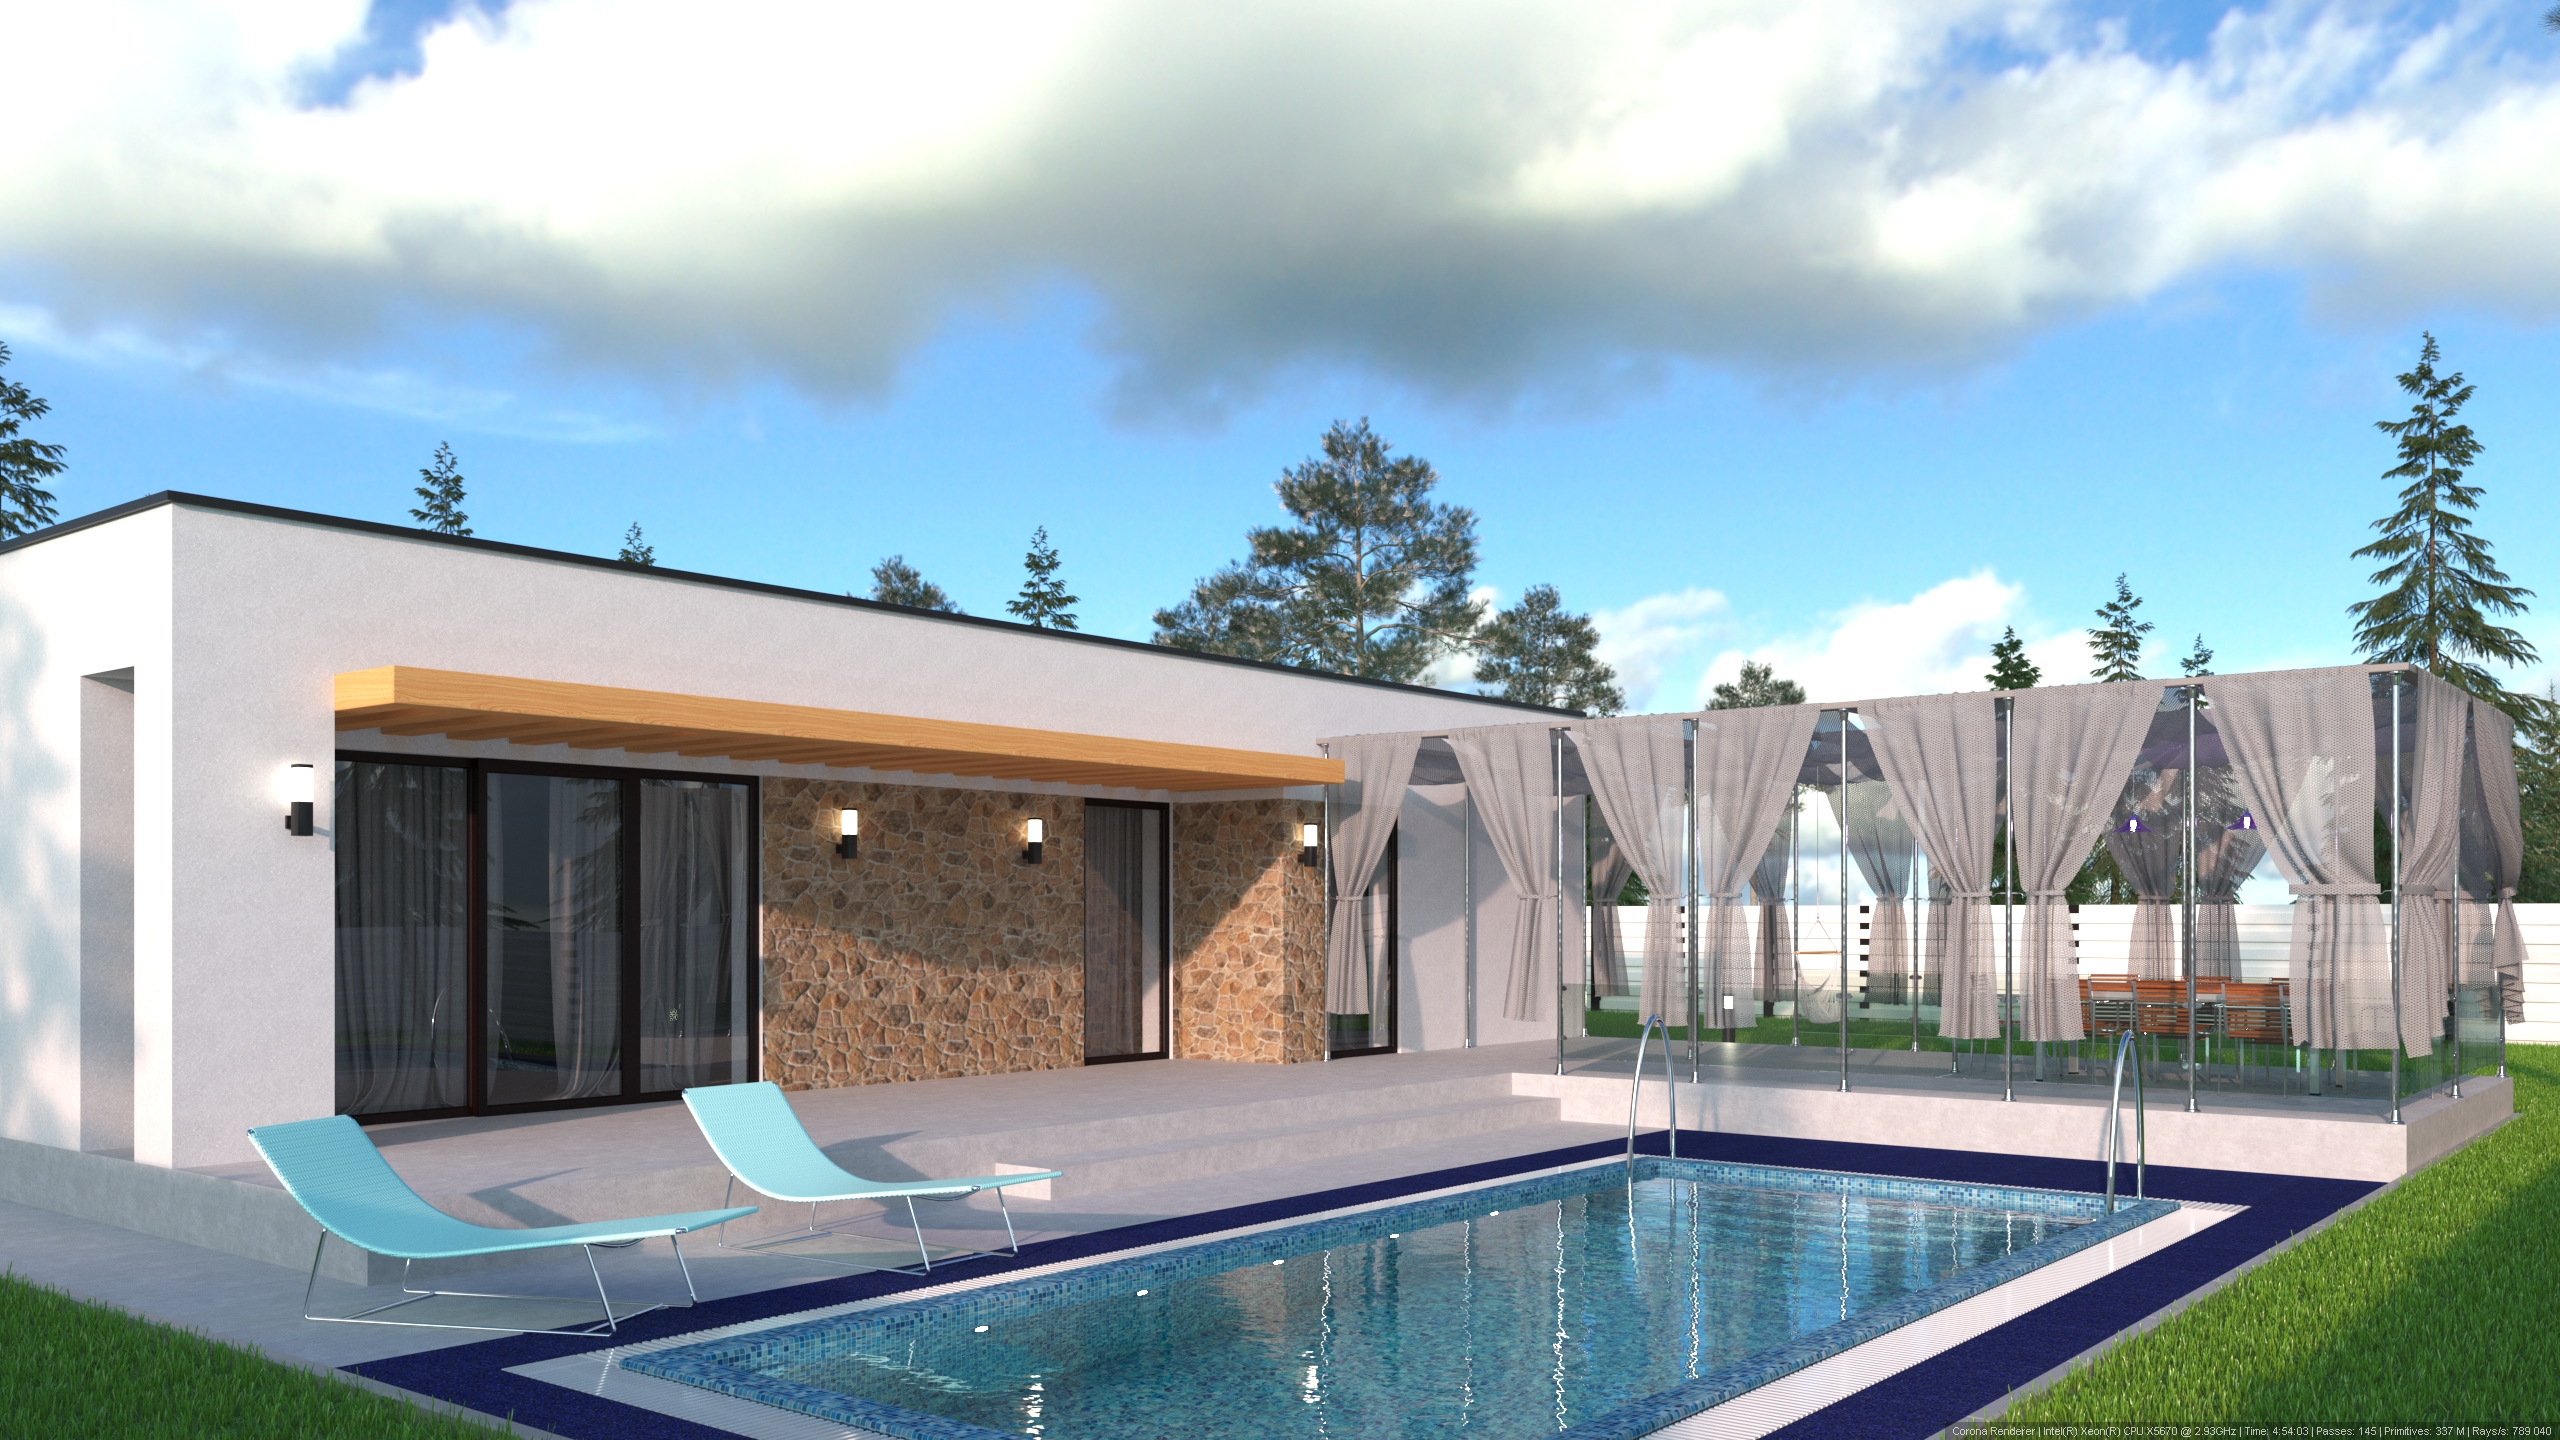 House on the plot in 3d max corona render image